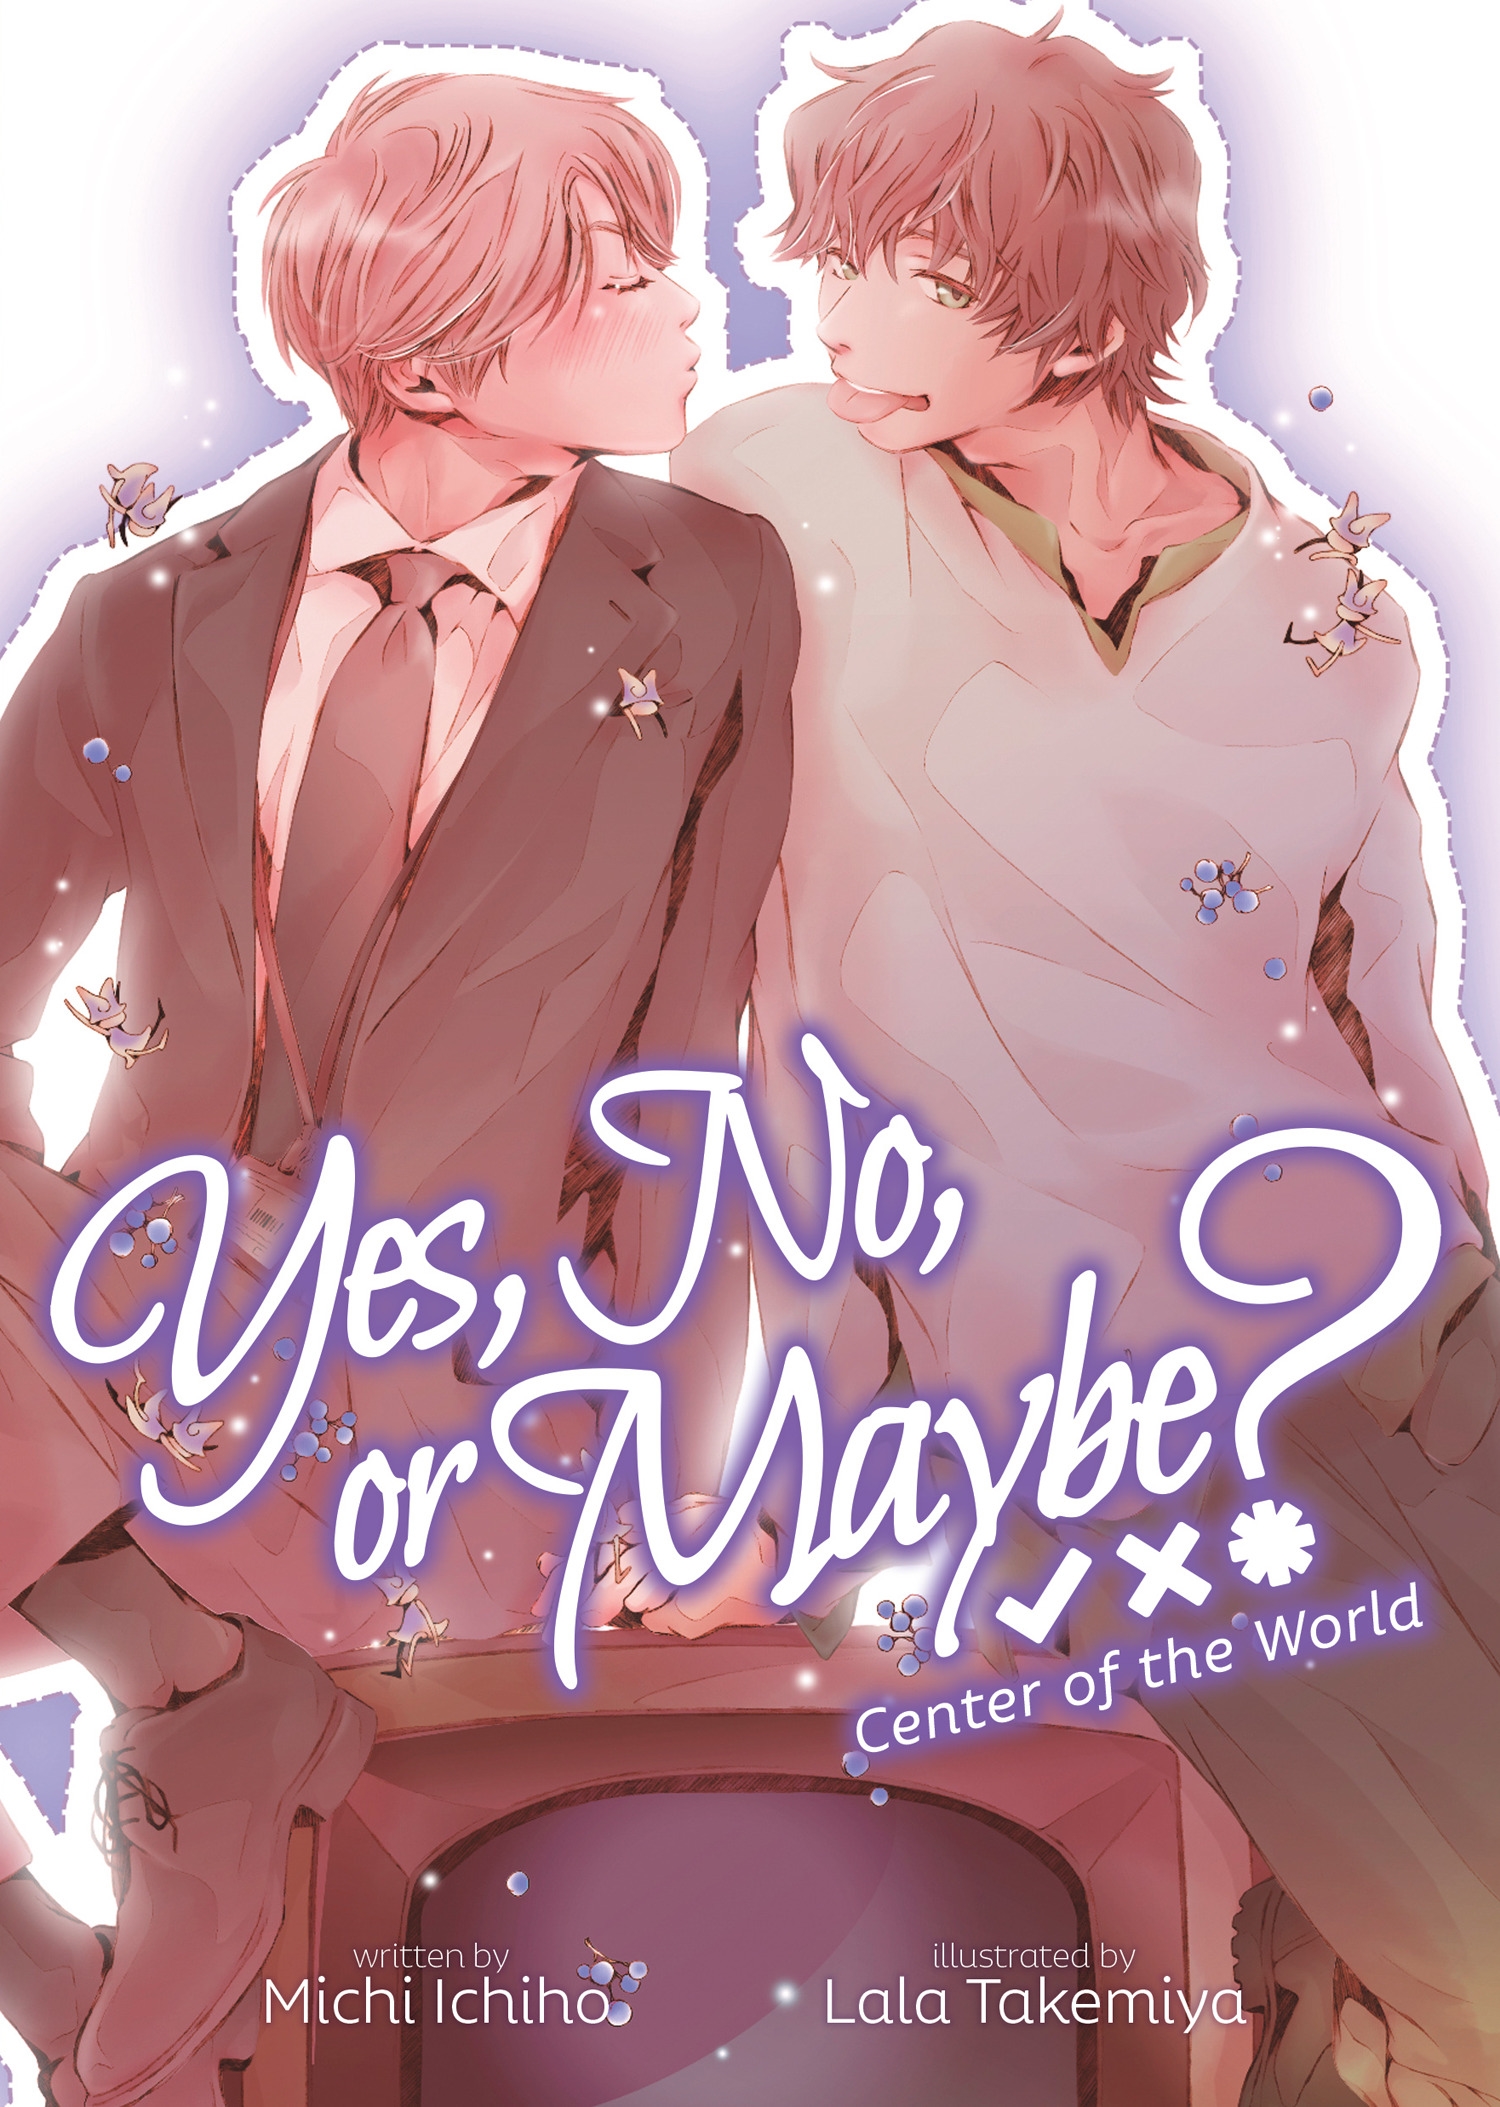 Yes, No, or Maybe? (Light Novel 2) - Center of the World by Michi 